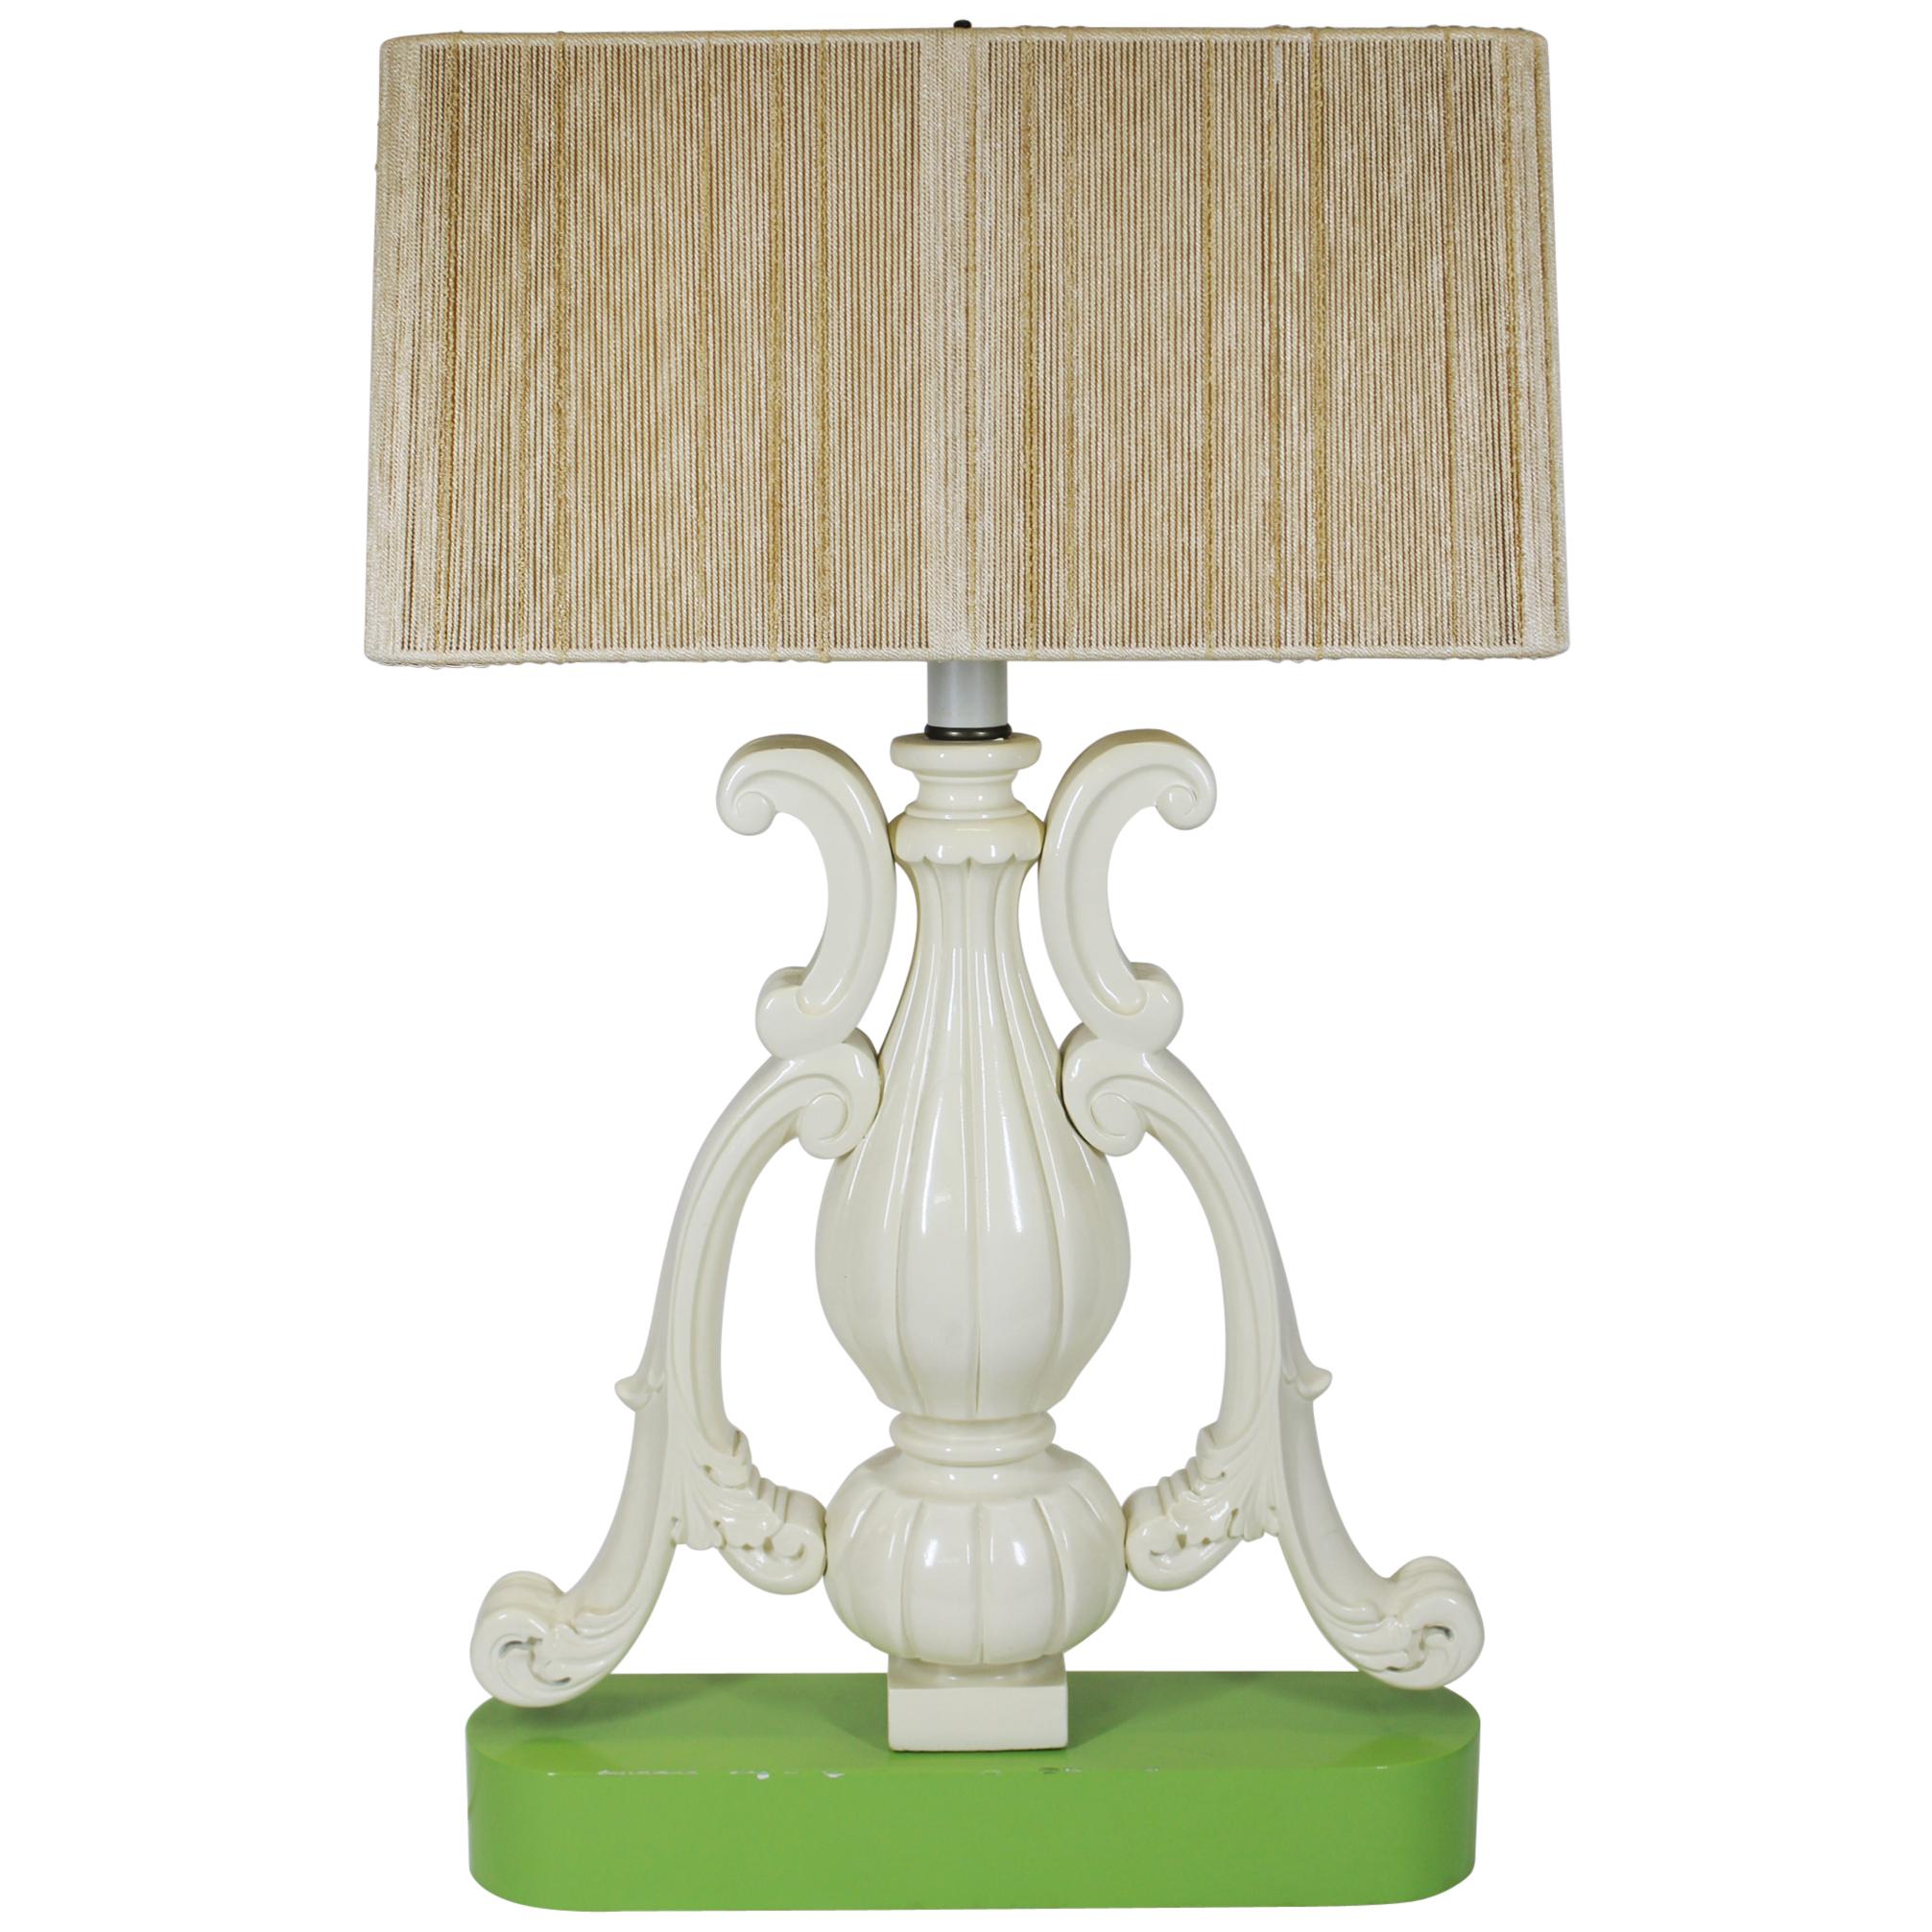 Hollywood Regency Vase Shaped Table Lamp in Lacquered Wood